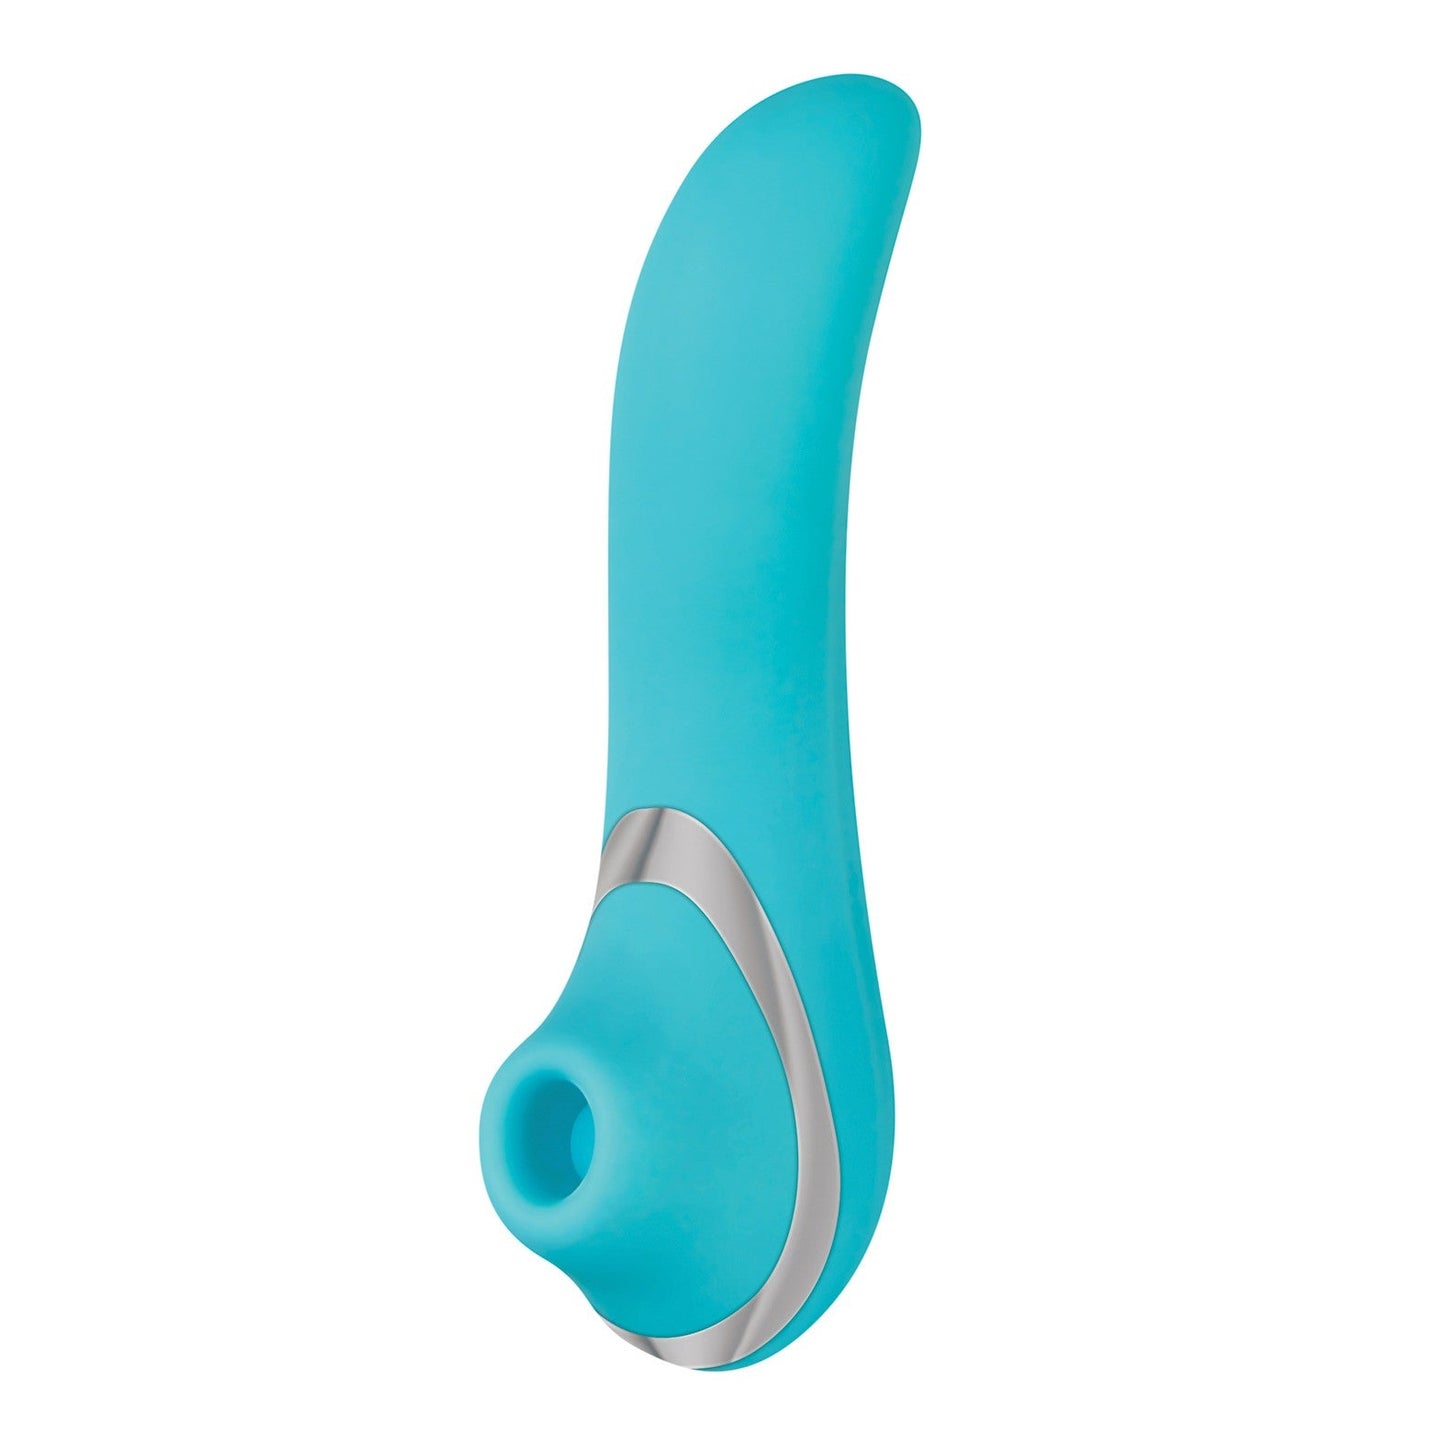 Adam & Eve French Kiss Her Clit Stimulator G-bliss O-maker - Teal